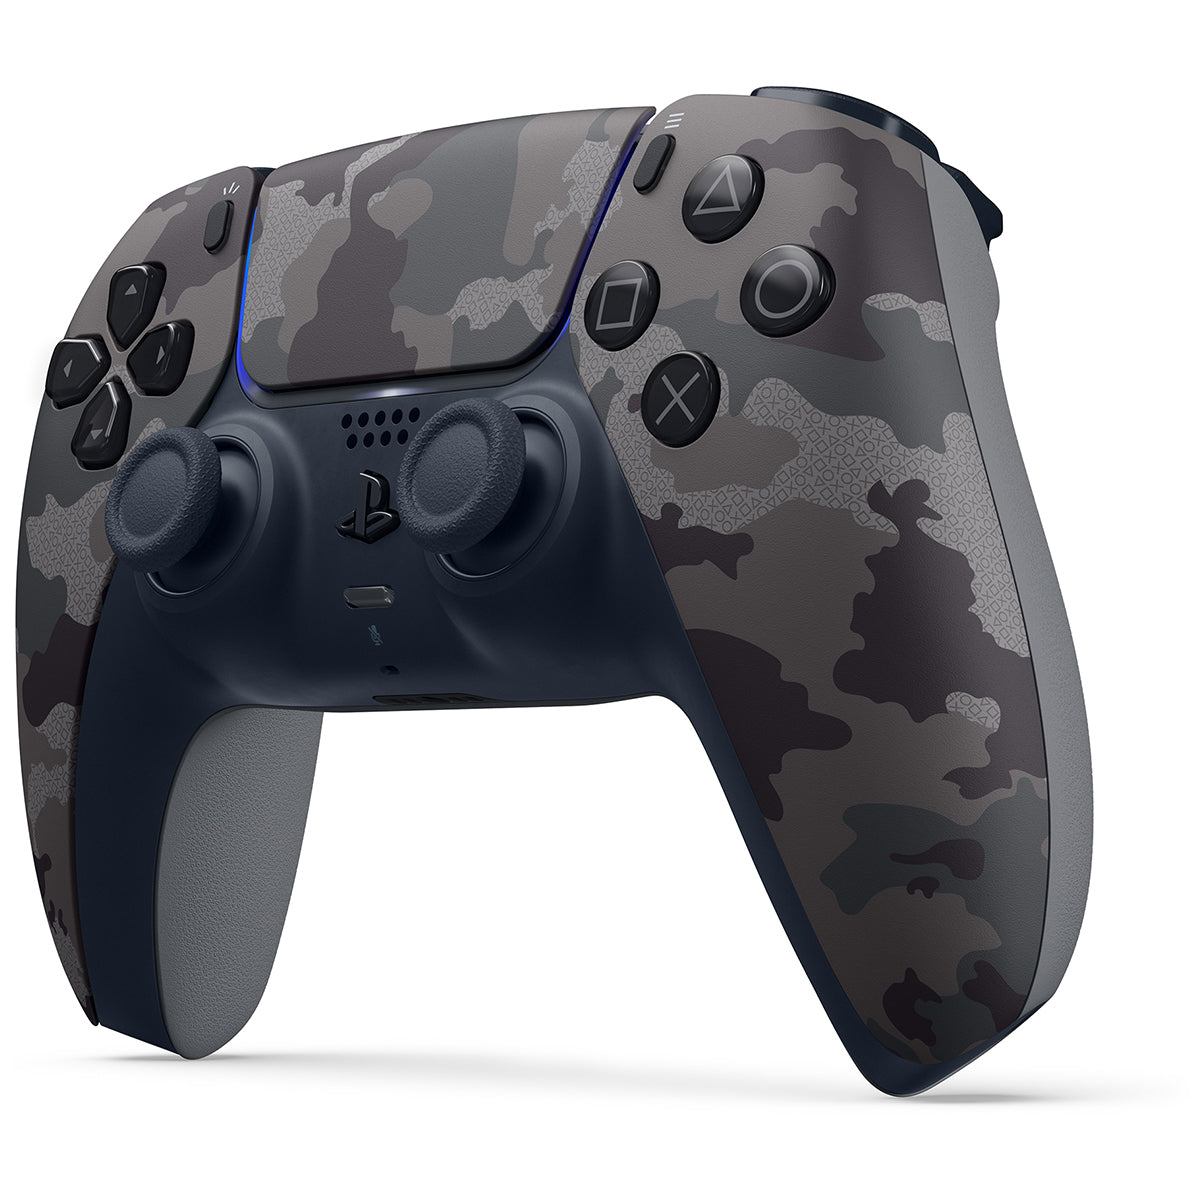 Sony Playstation 5 Digital Edition with Extra Gray Camo Controller and FPS Grip Kit Bundle - Pro-Distributing